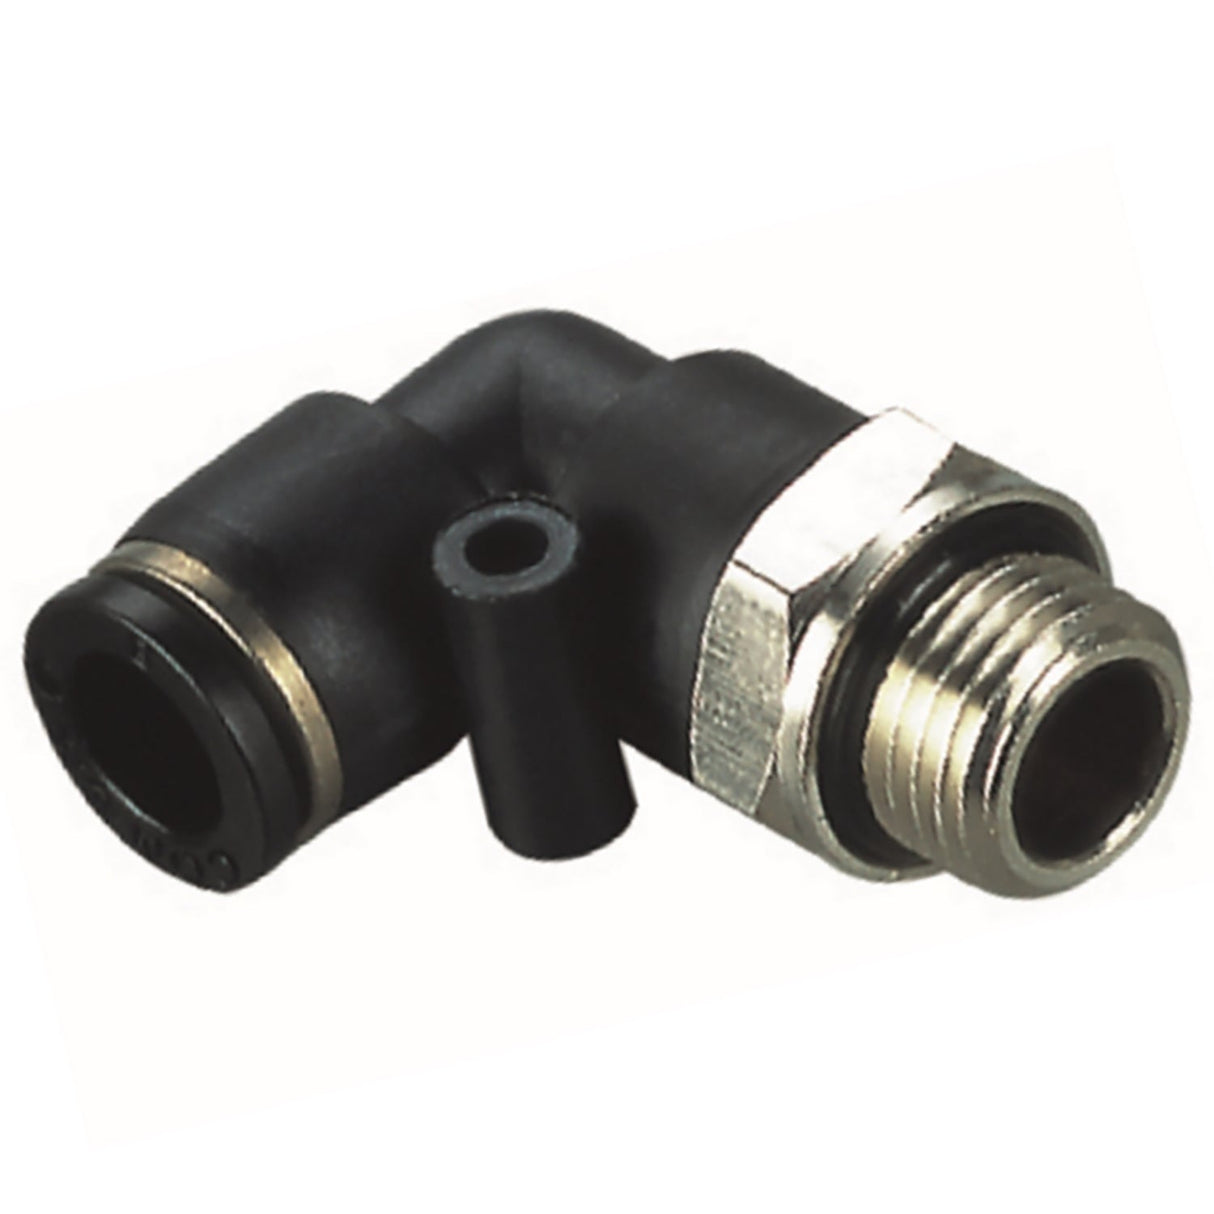 Threaded Coupling knee with O-ring 6x1/2"